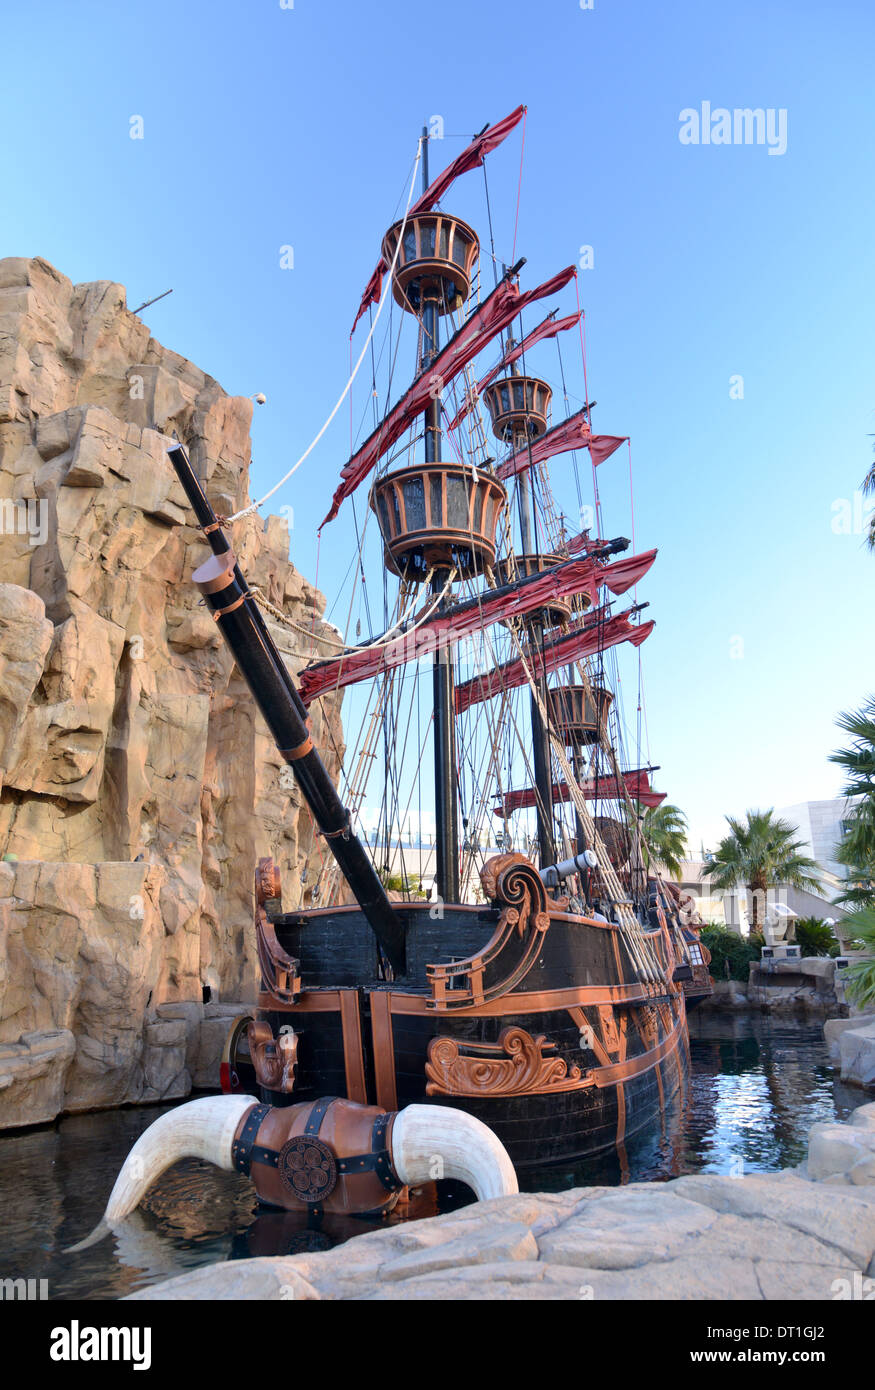 Pirate ships and giant cliff skull at the Treasure Island resort hotel and casino in Las Vegas Stock Photo